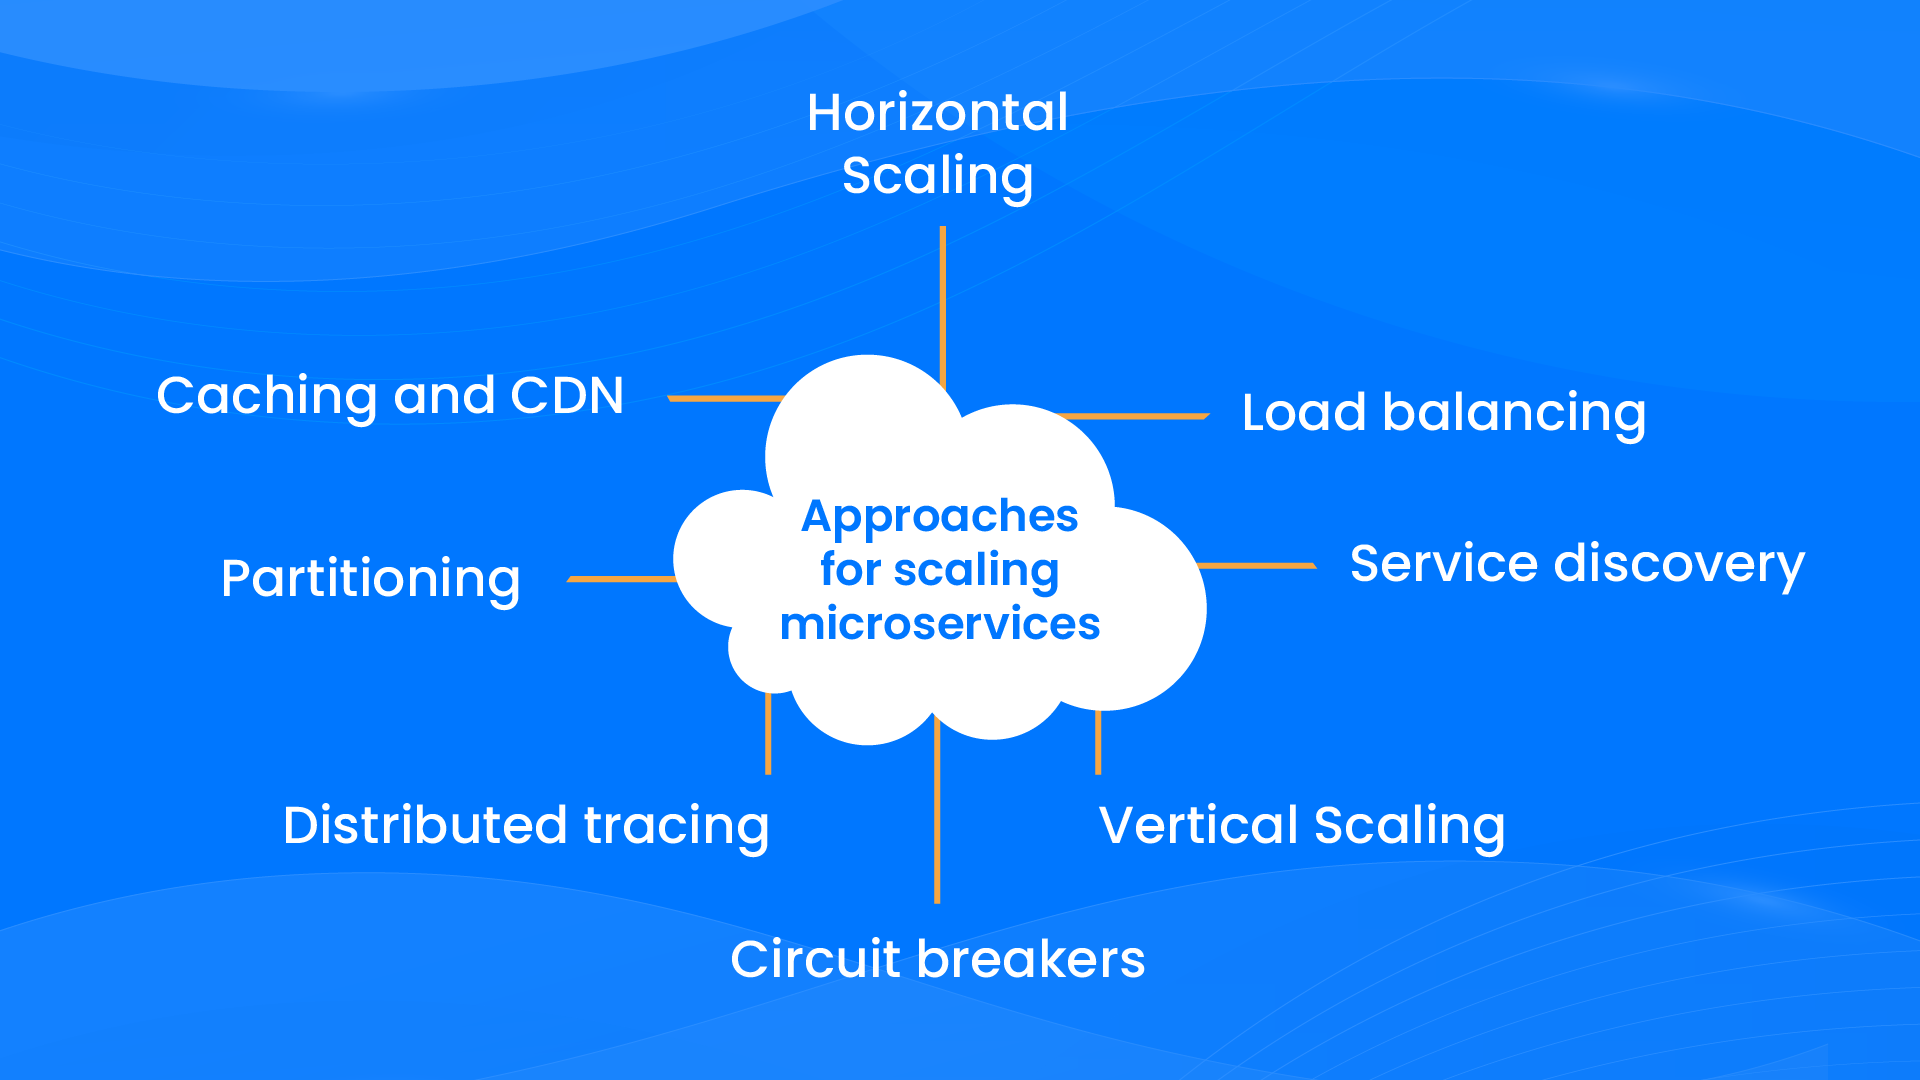 How to scale microservices